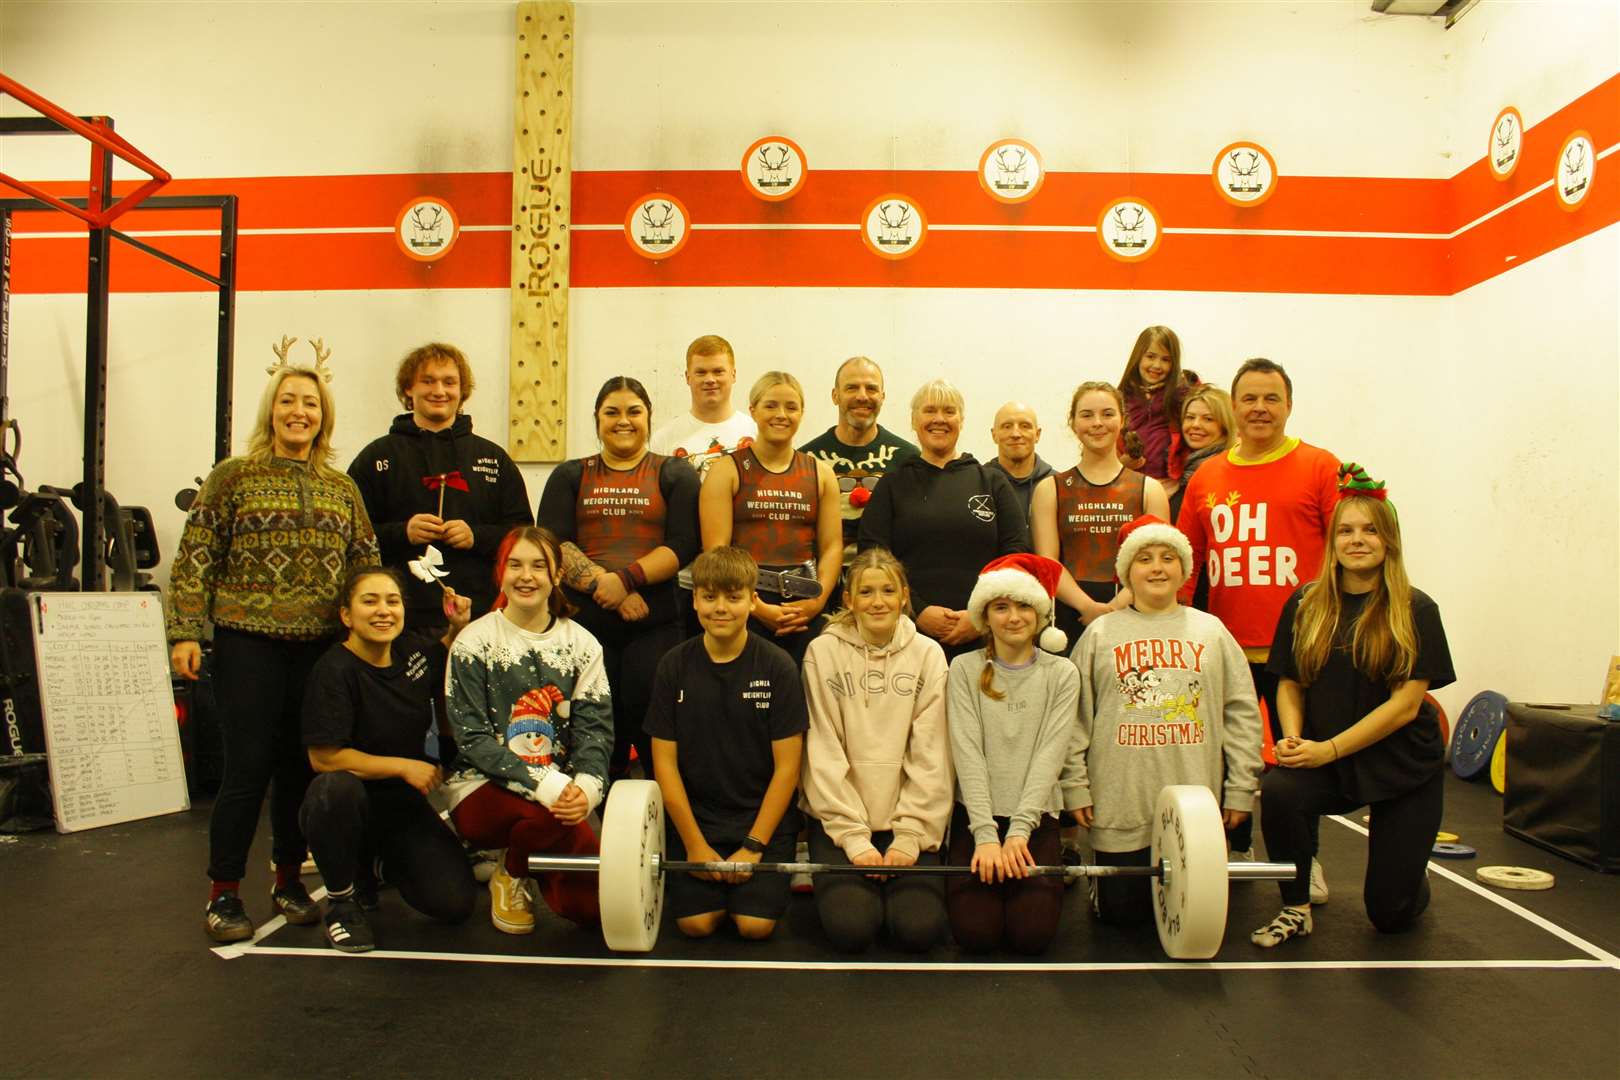 A group shot of the club's members at the Christmas fun competition.